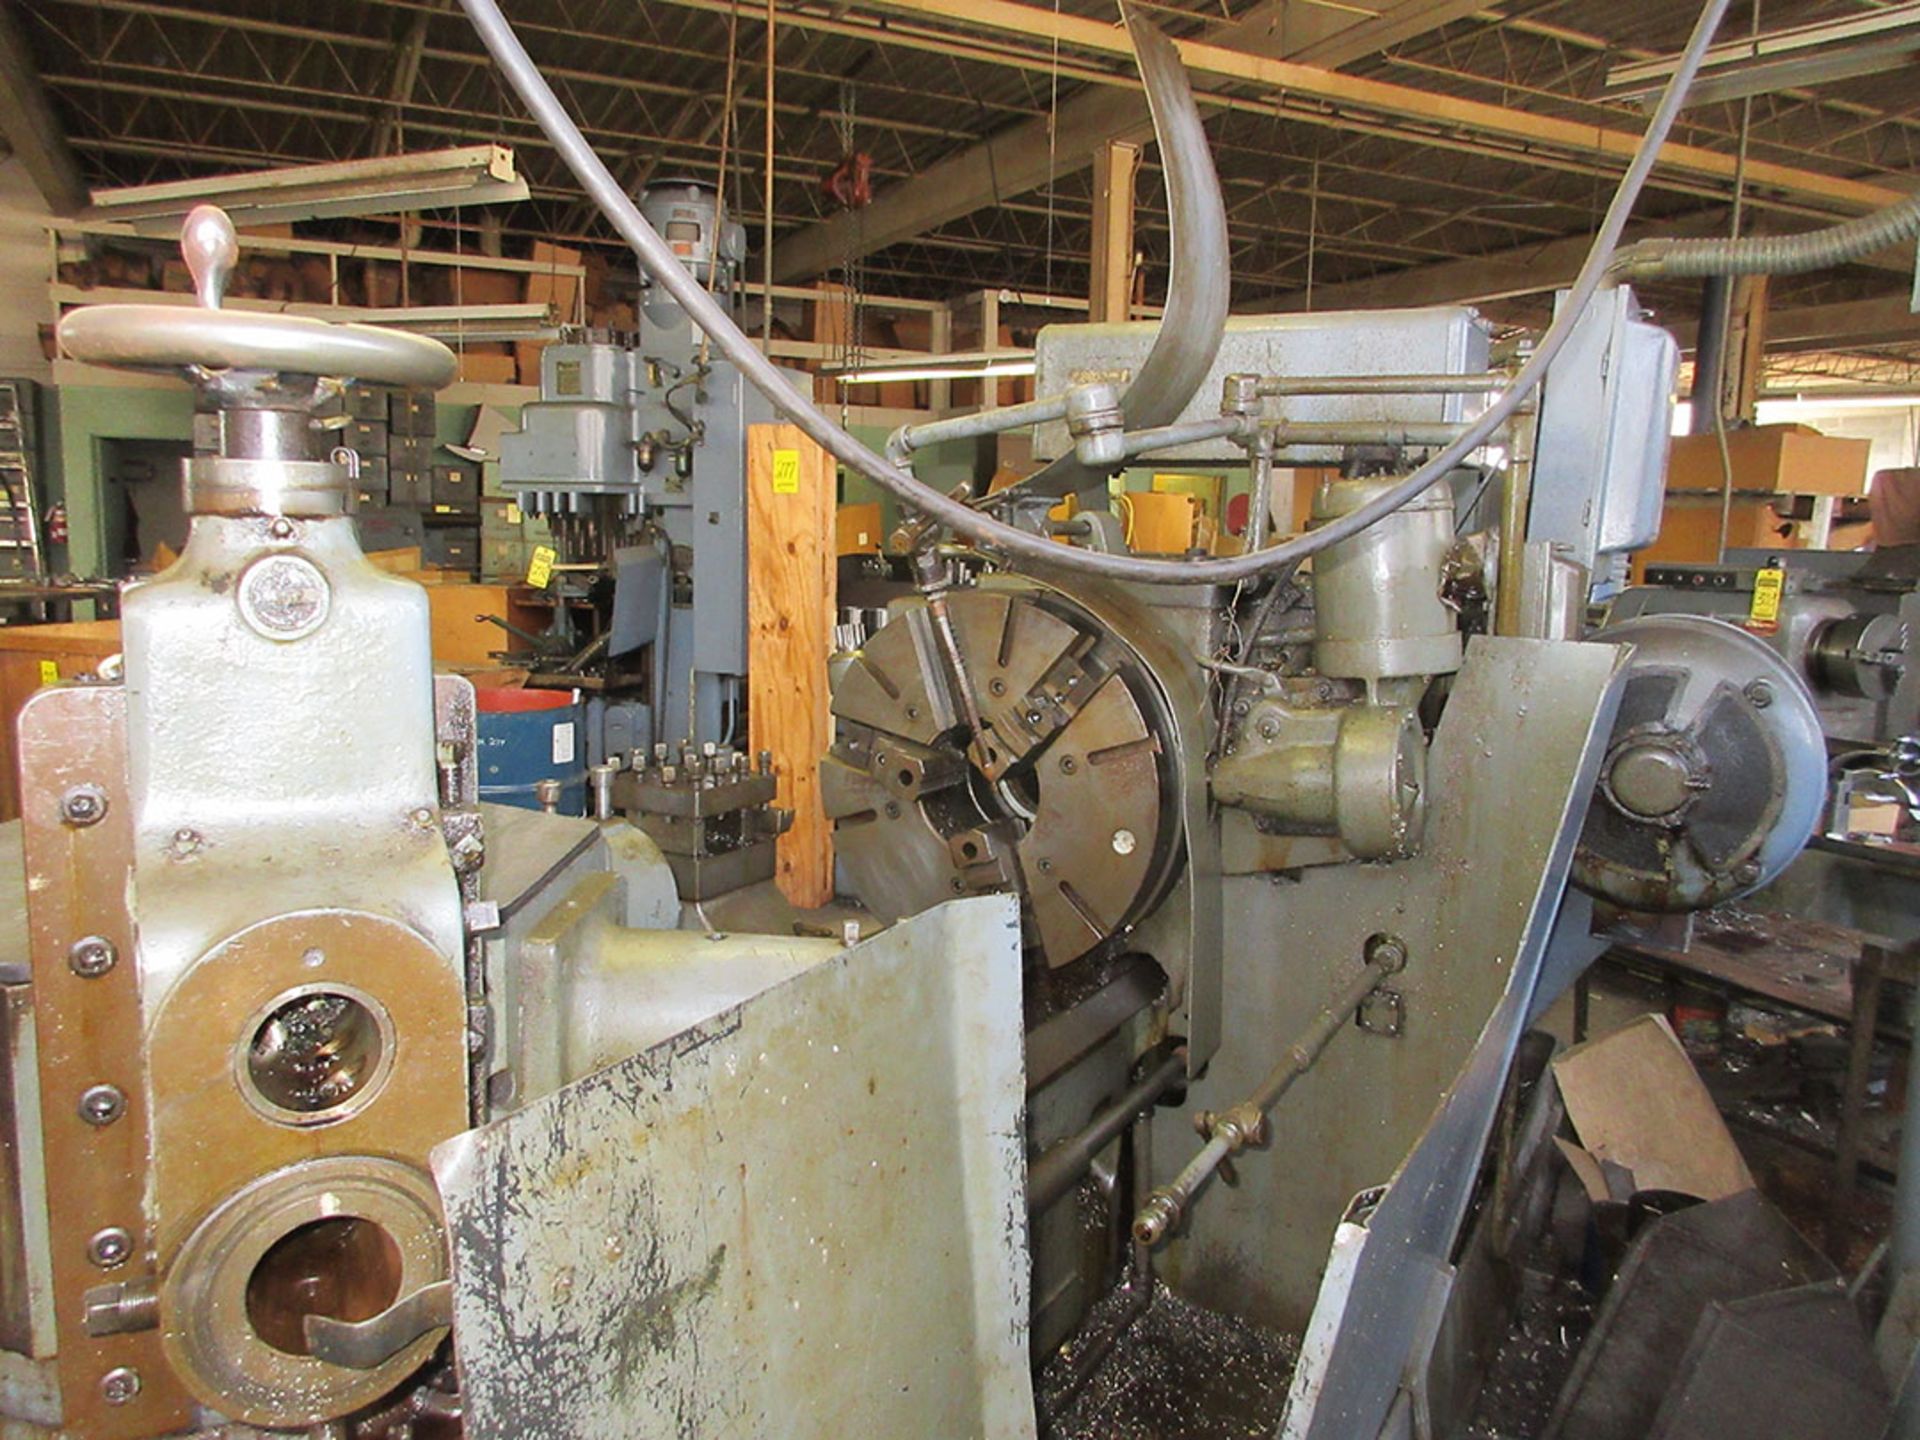 WARNER & SWASEY 1500 #4A TURRET LATHE, 8 1/4'' SPINDLE BORE, POWER WRENCH, COOLANT, 24'' 3-JAW - Image 3 of 4